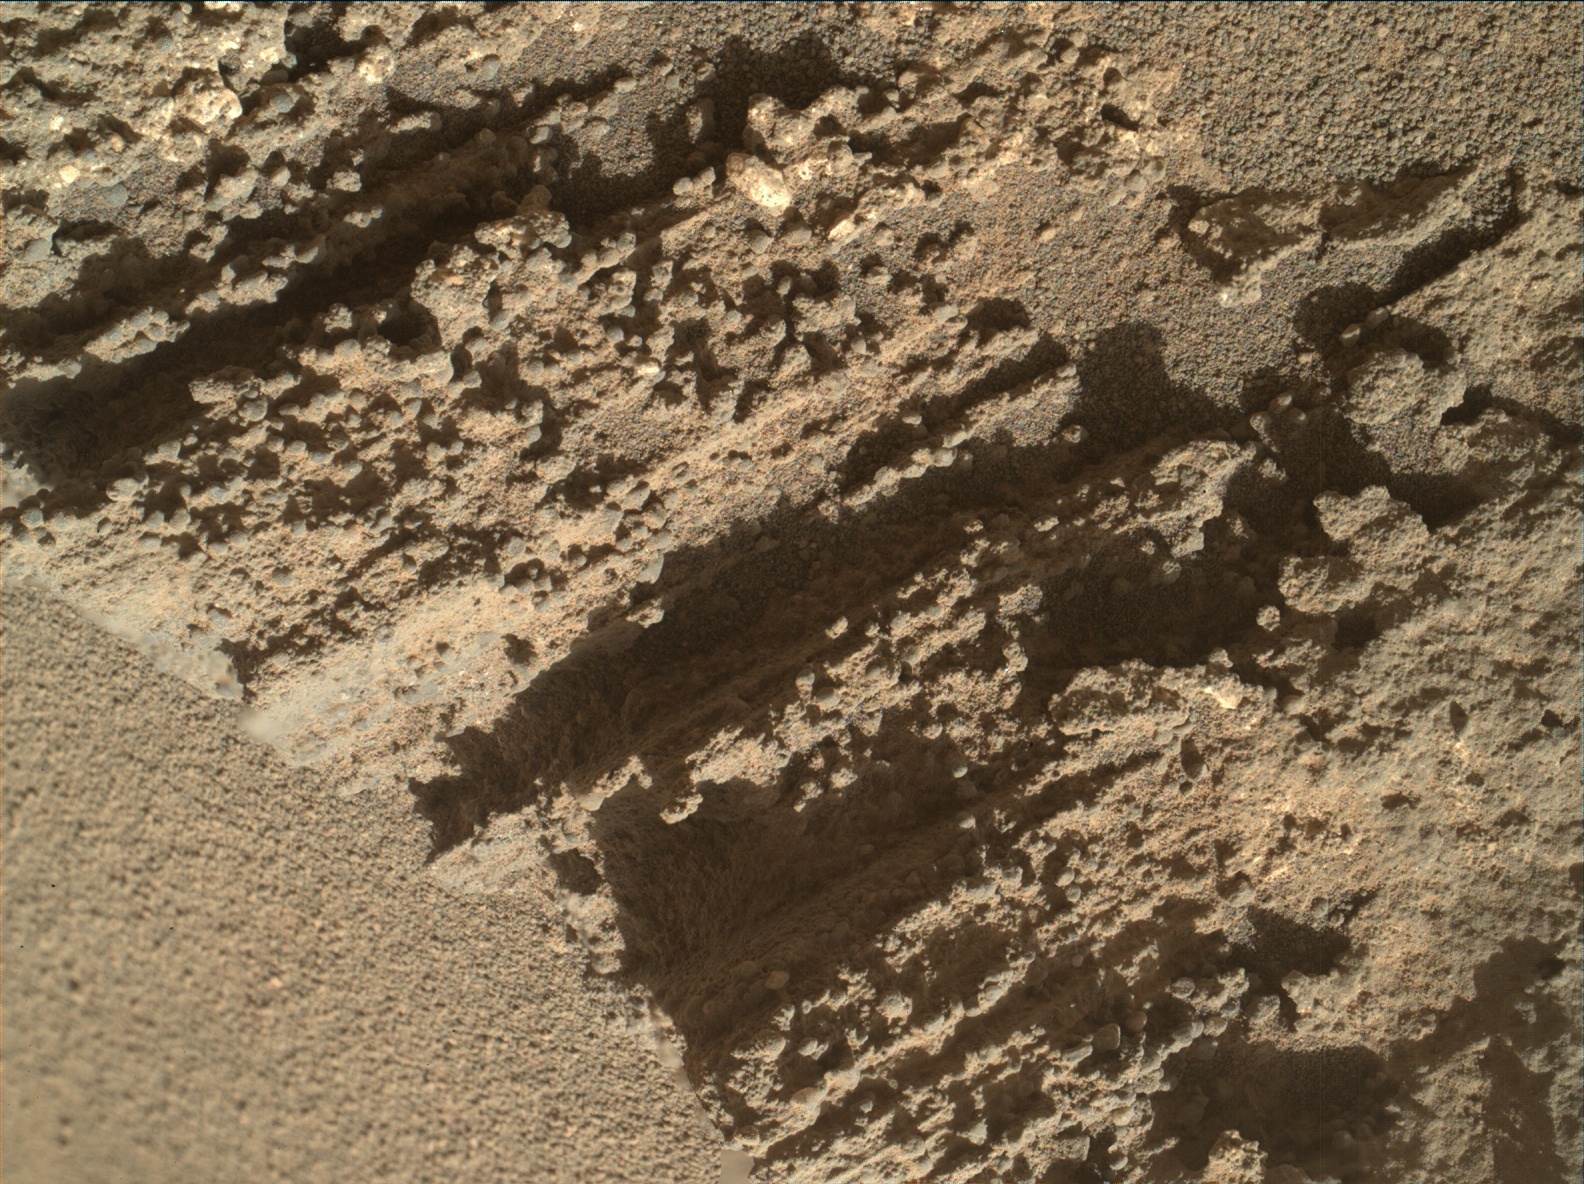 Nasa's Mars rover Curiosity acquired this image using its Mars Hand Lens Imager (MAHLI) on Sol 1280